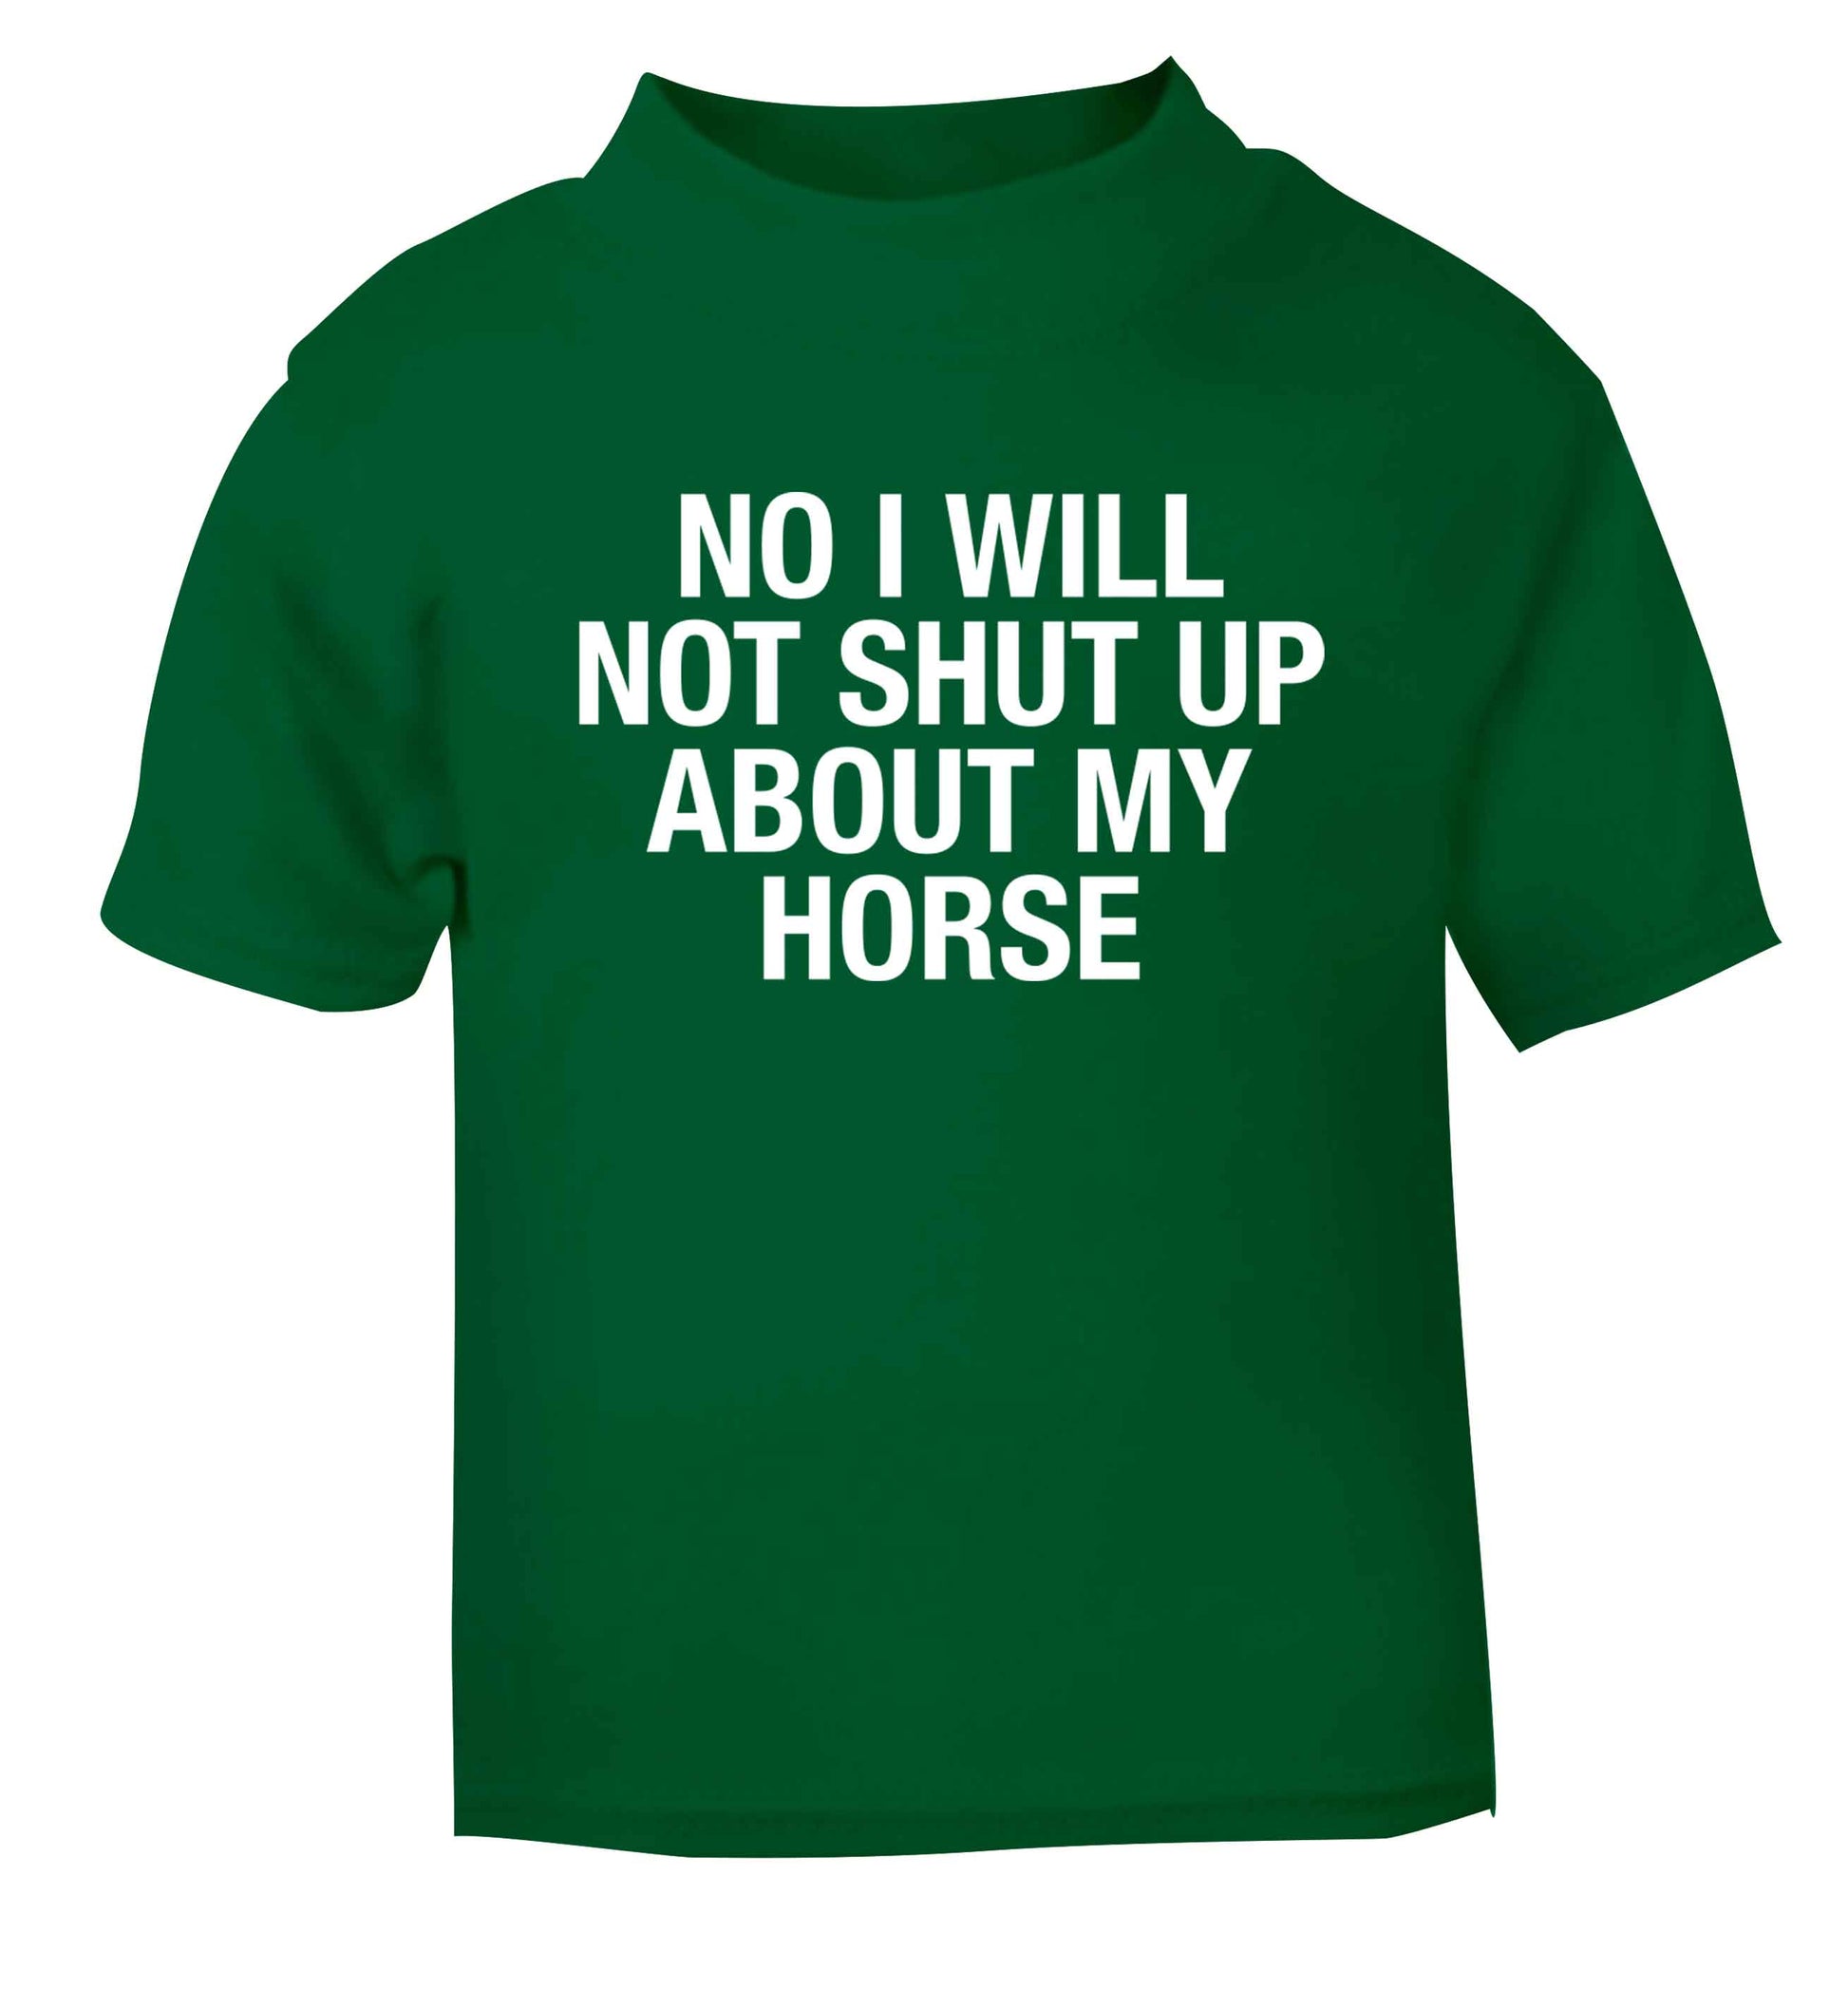 No I will not shut up talking about my horse green baby toddler Tshirt 2 Years